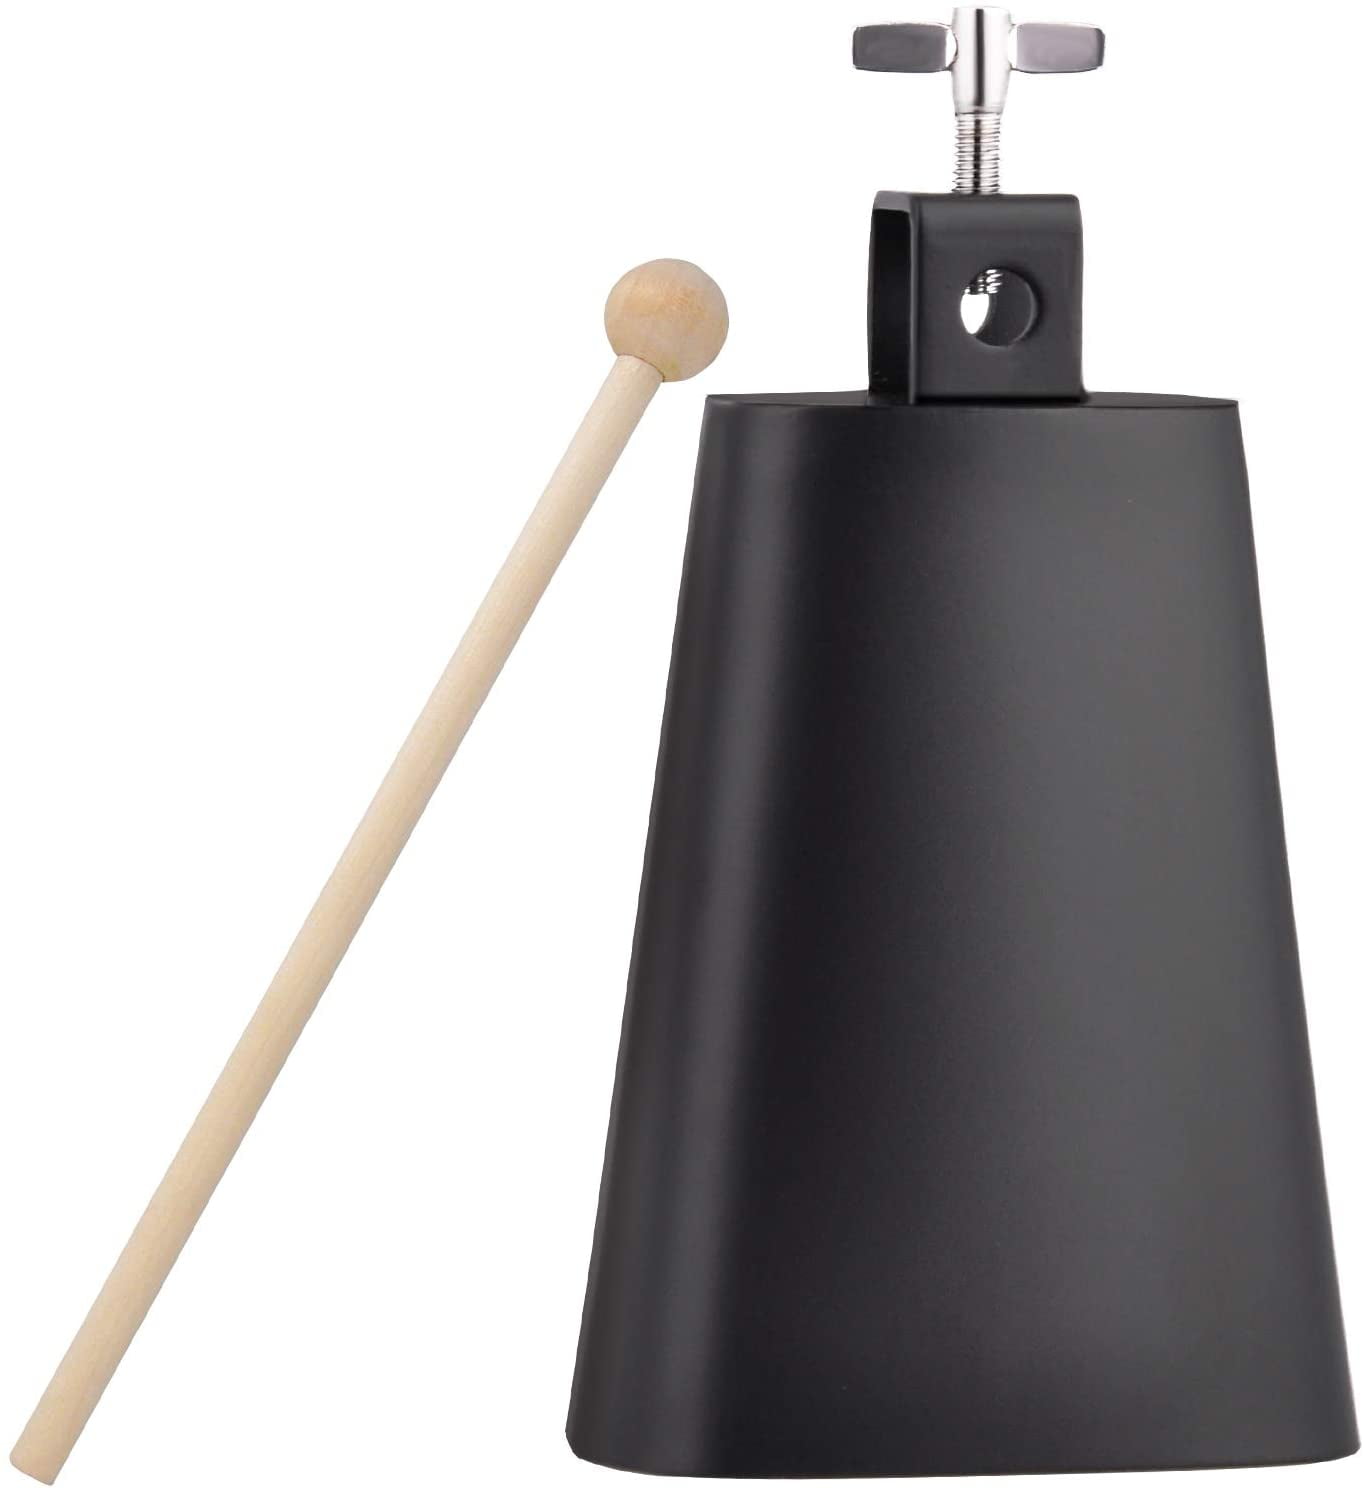 Percussion Cowbell,6 Inch Metal Durable Percussion Musical Handheld Kit Drum Set Cowbell Instrument Accessories